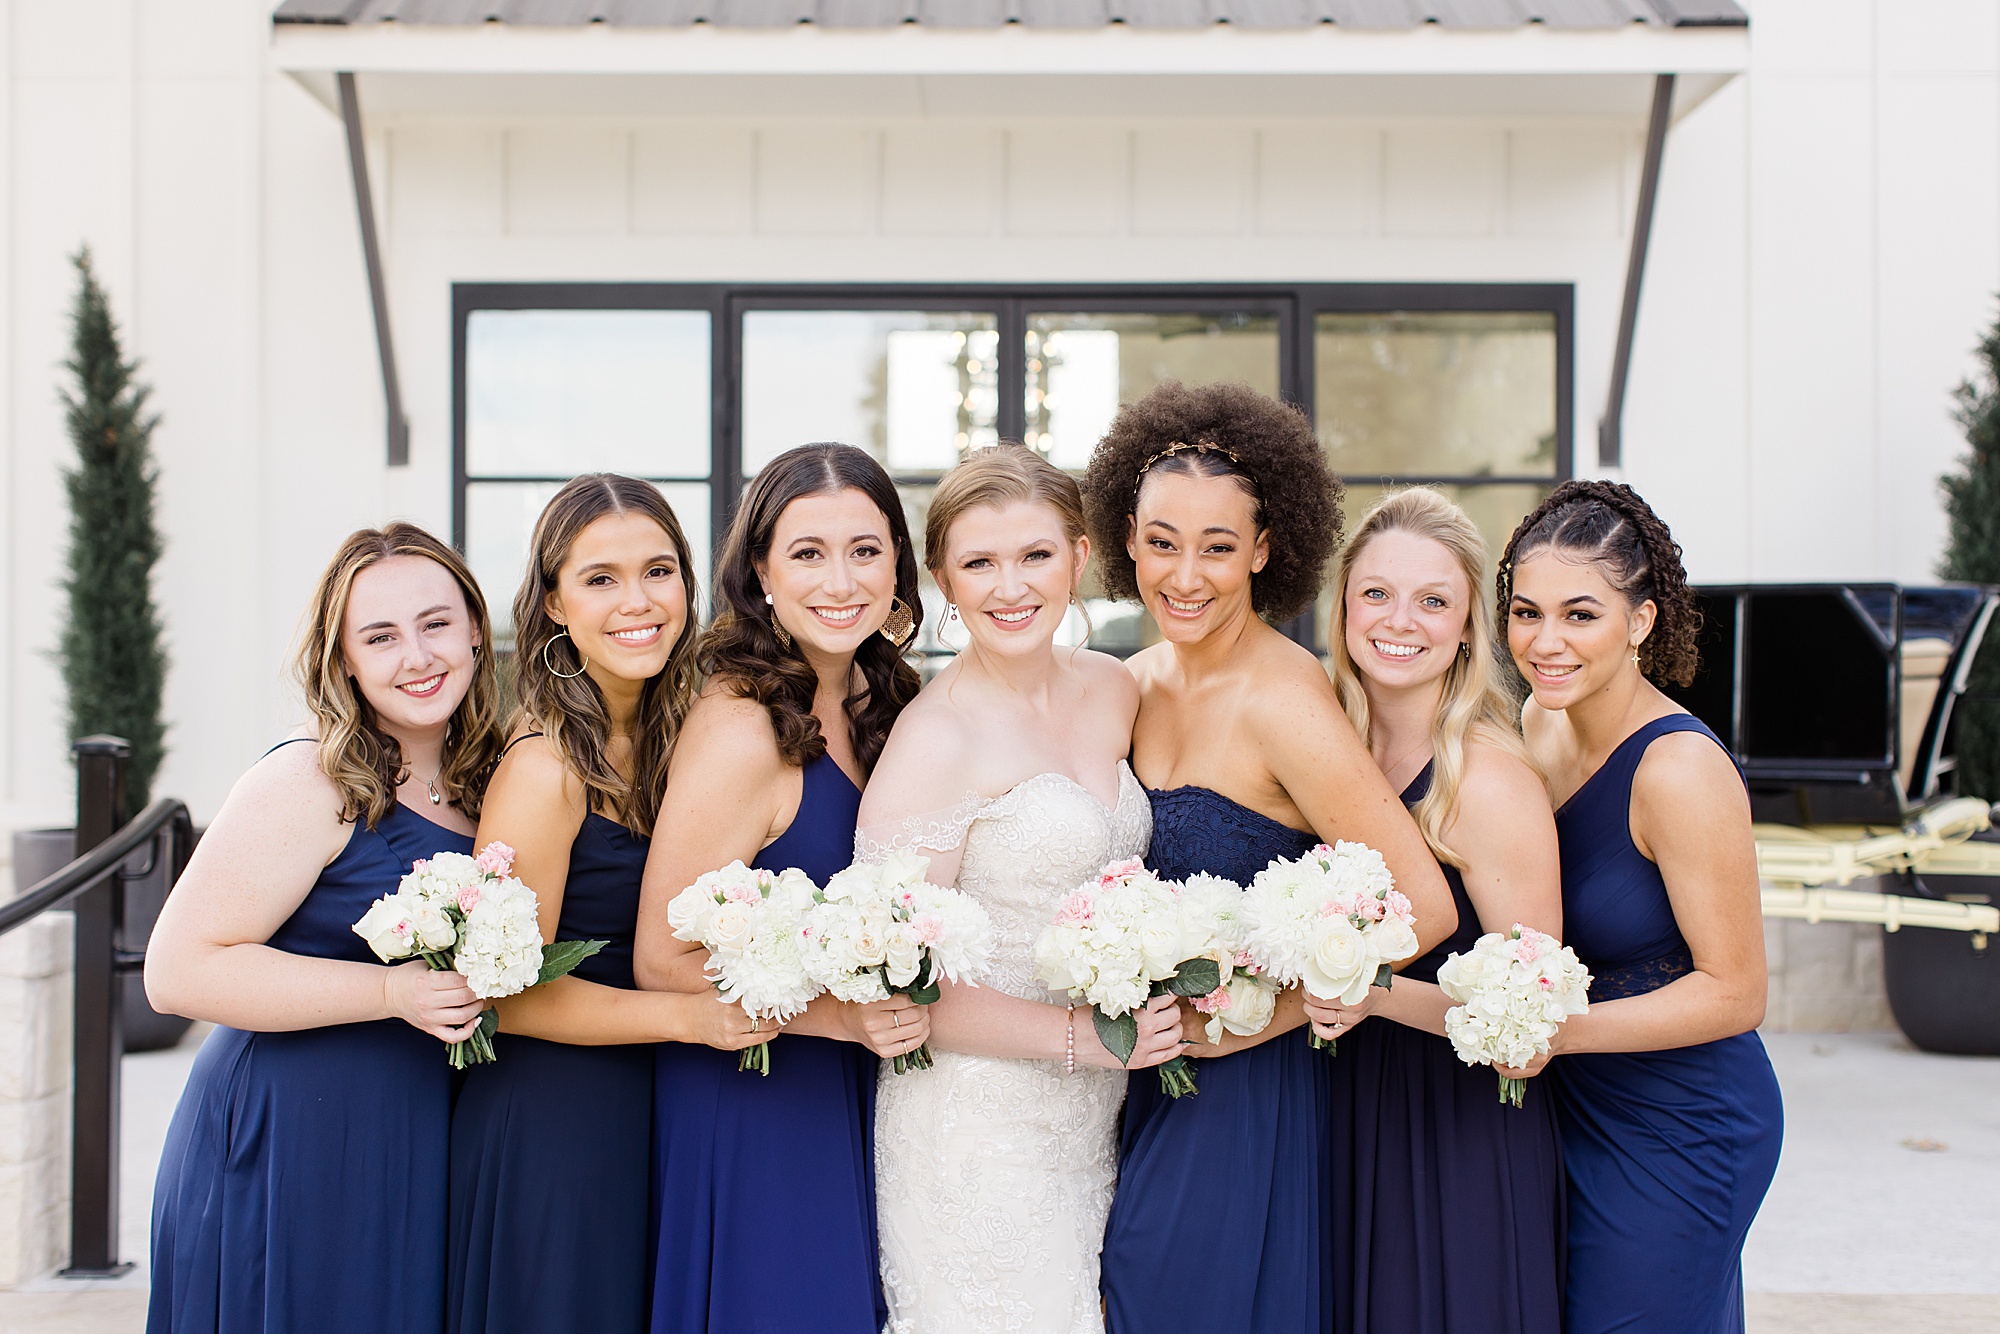 bride and bridesmaids pose with bouquets of white flowers